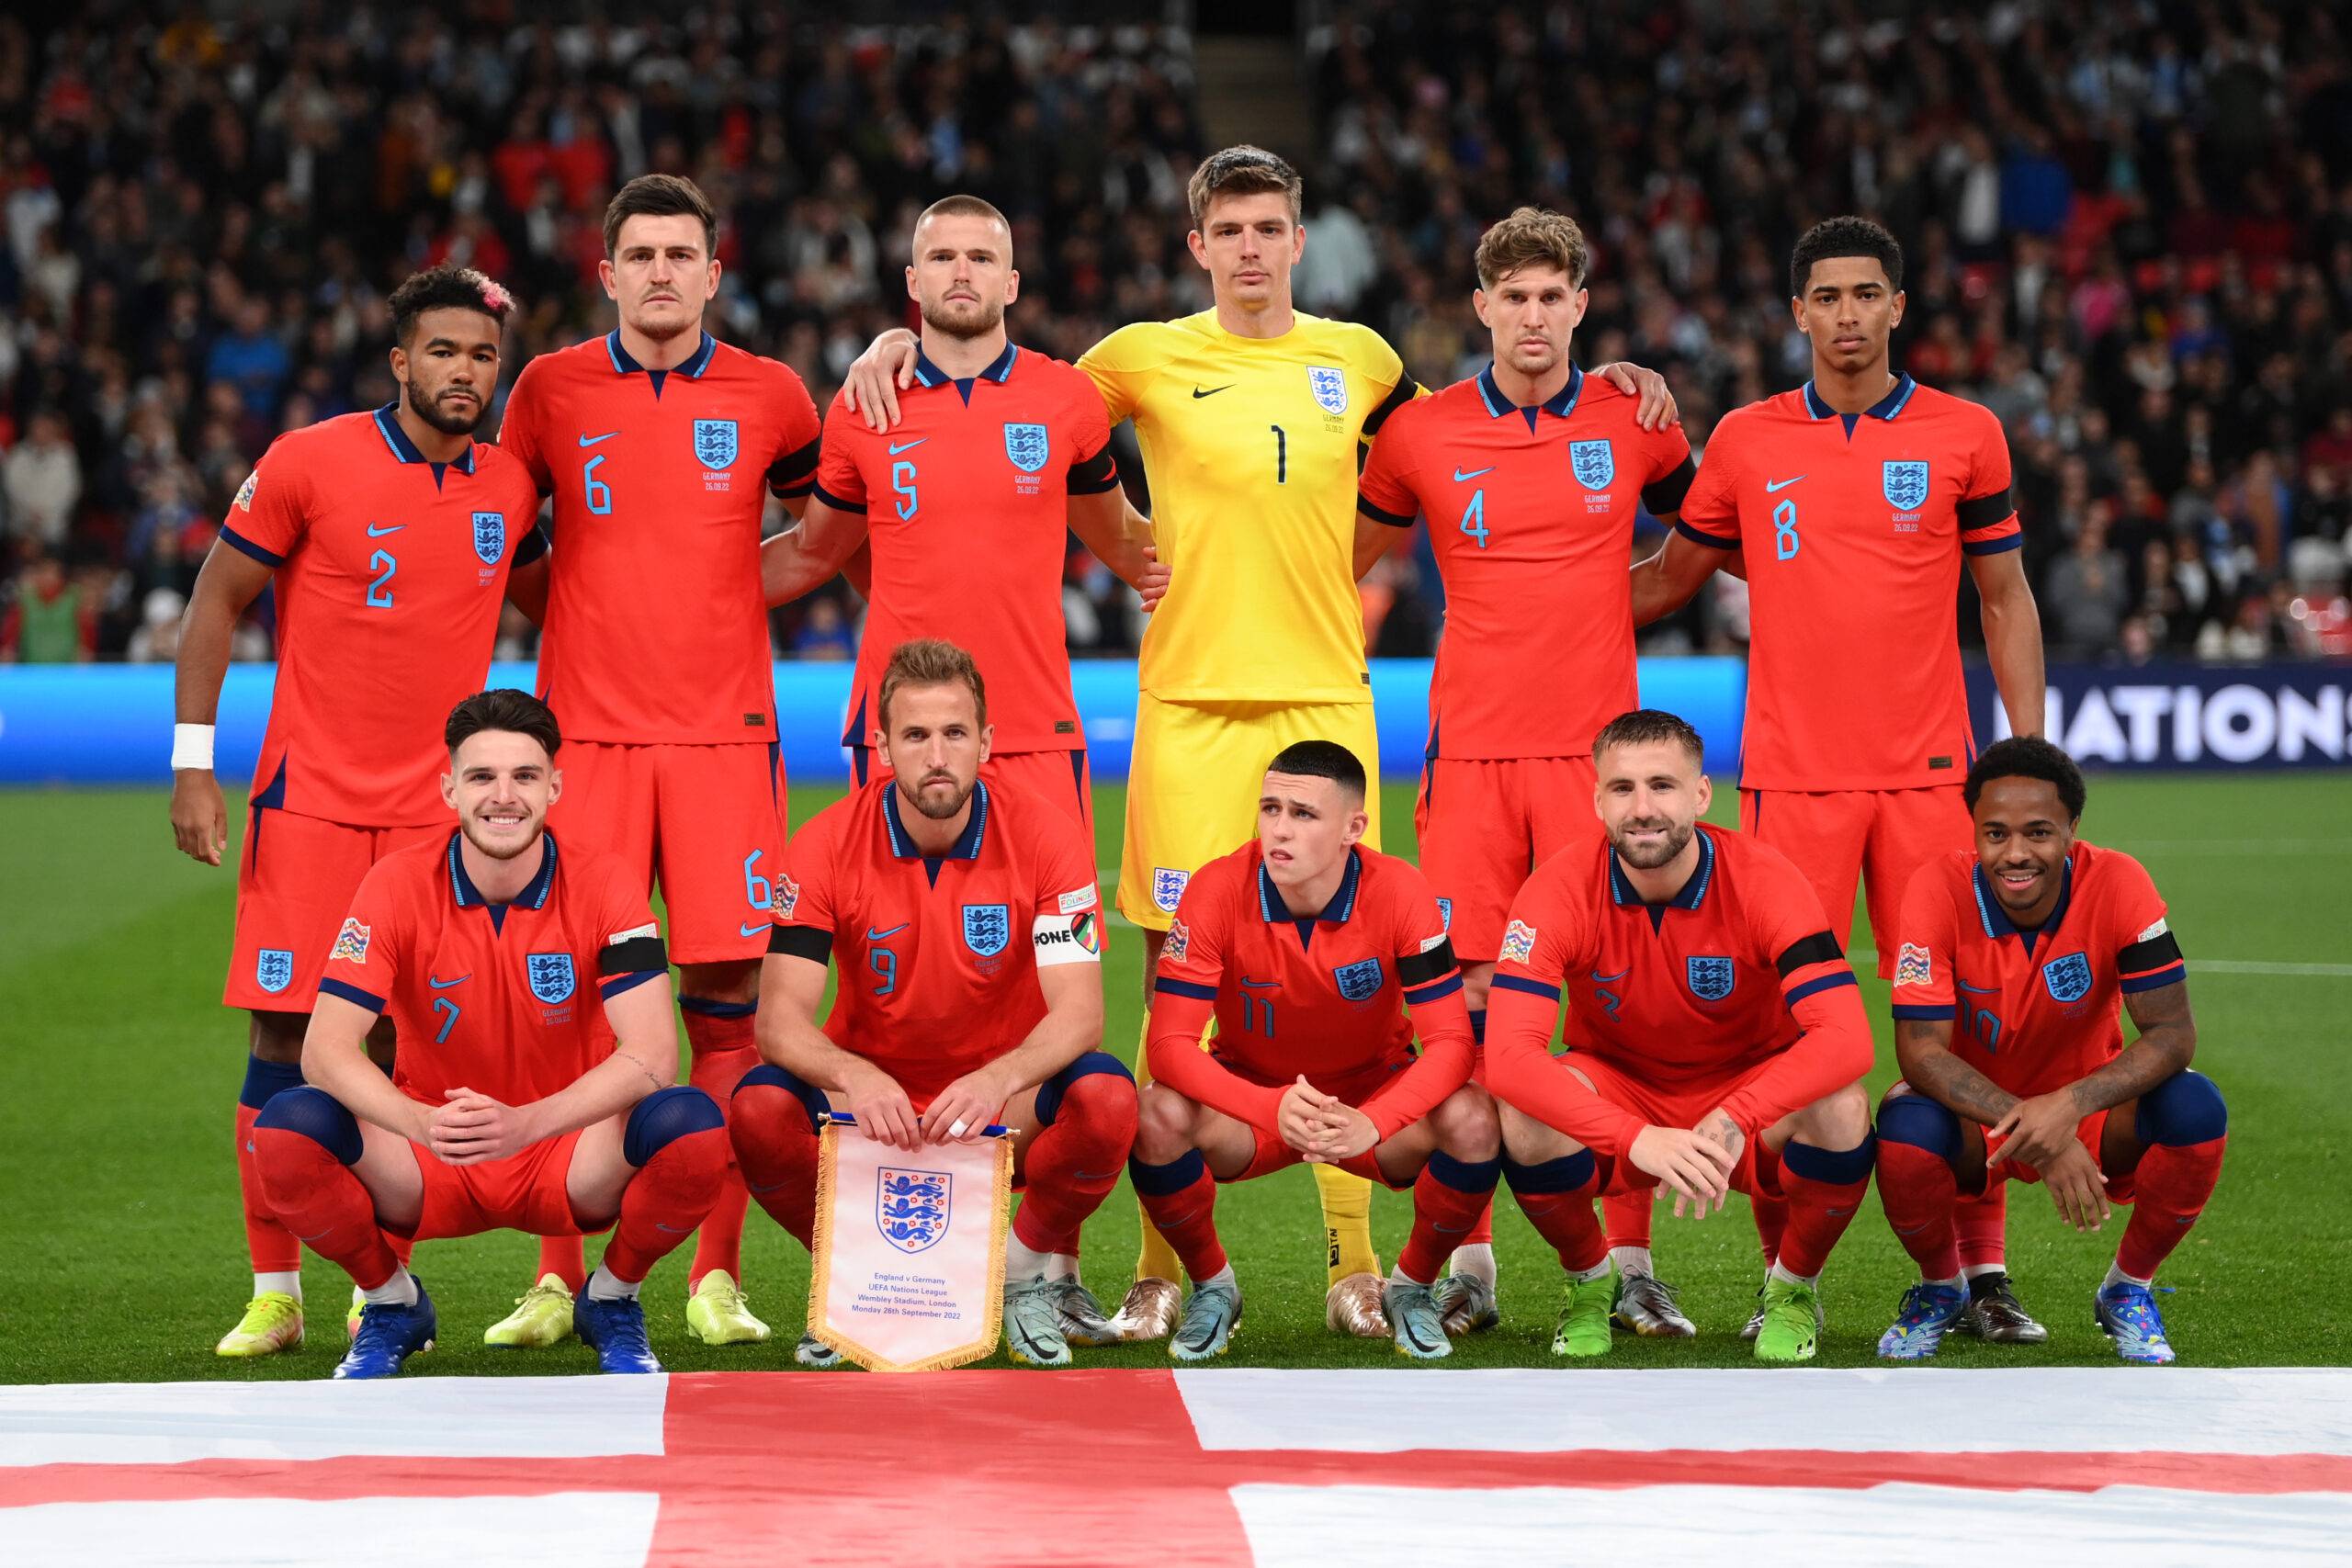 England squad pose for photos before their game against Germany.